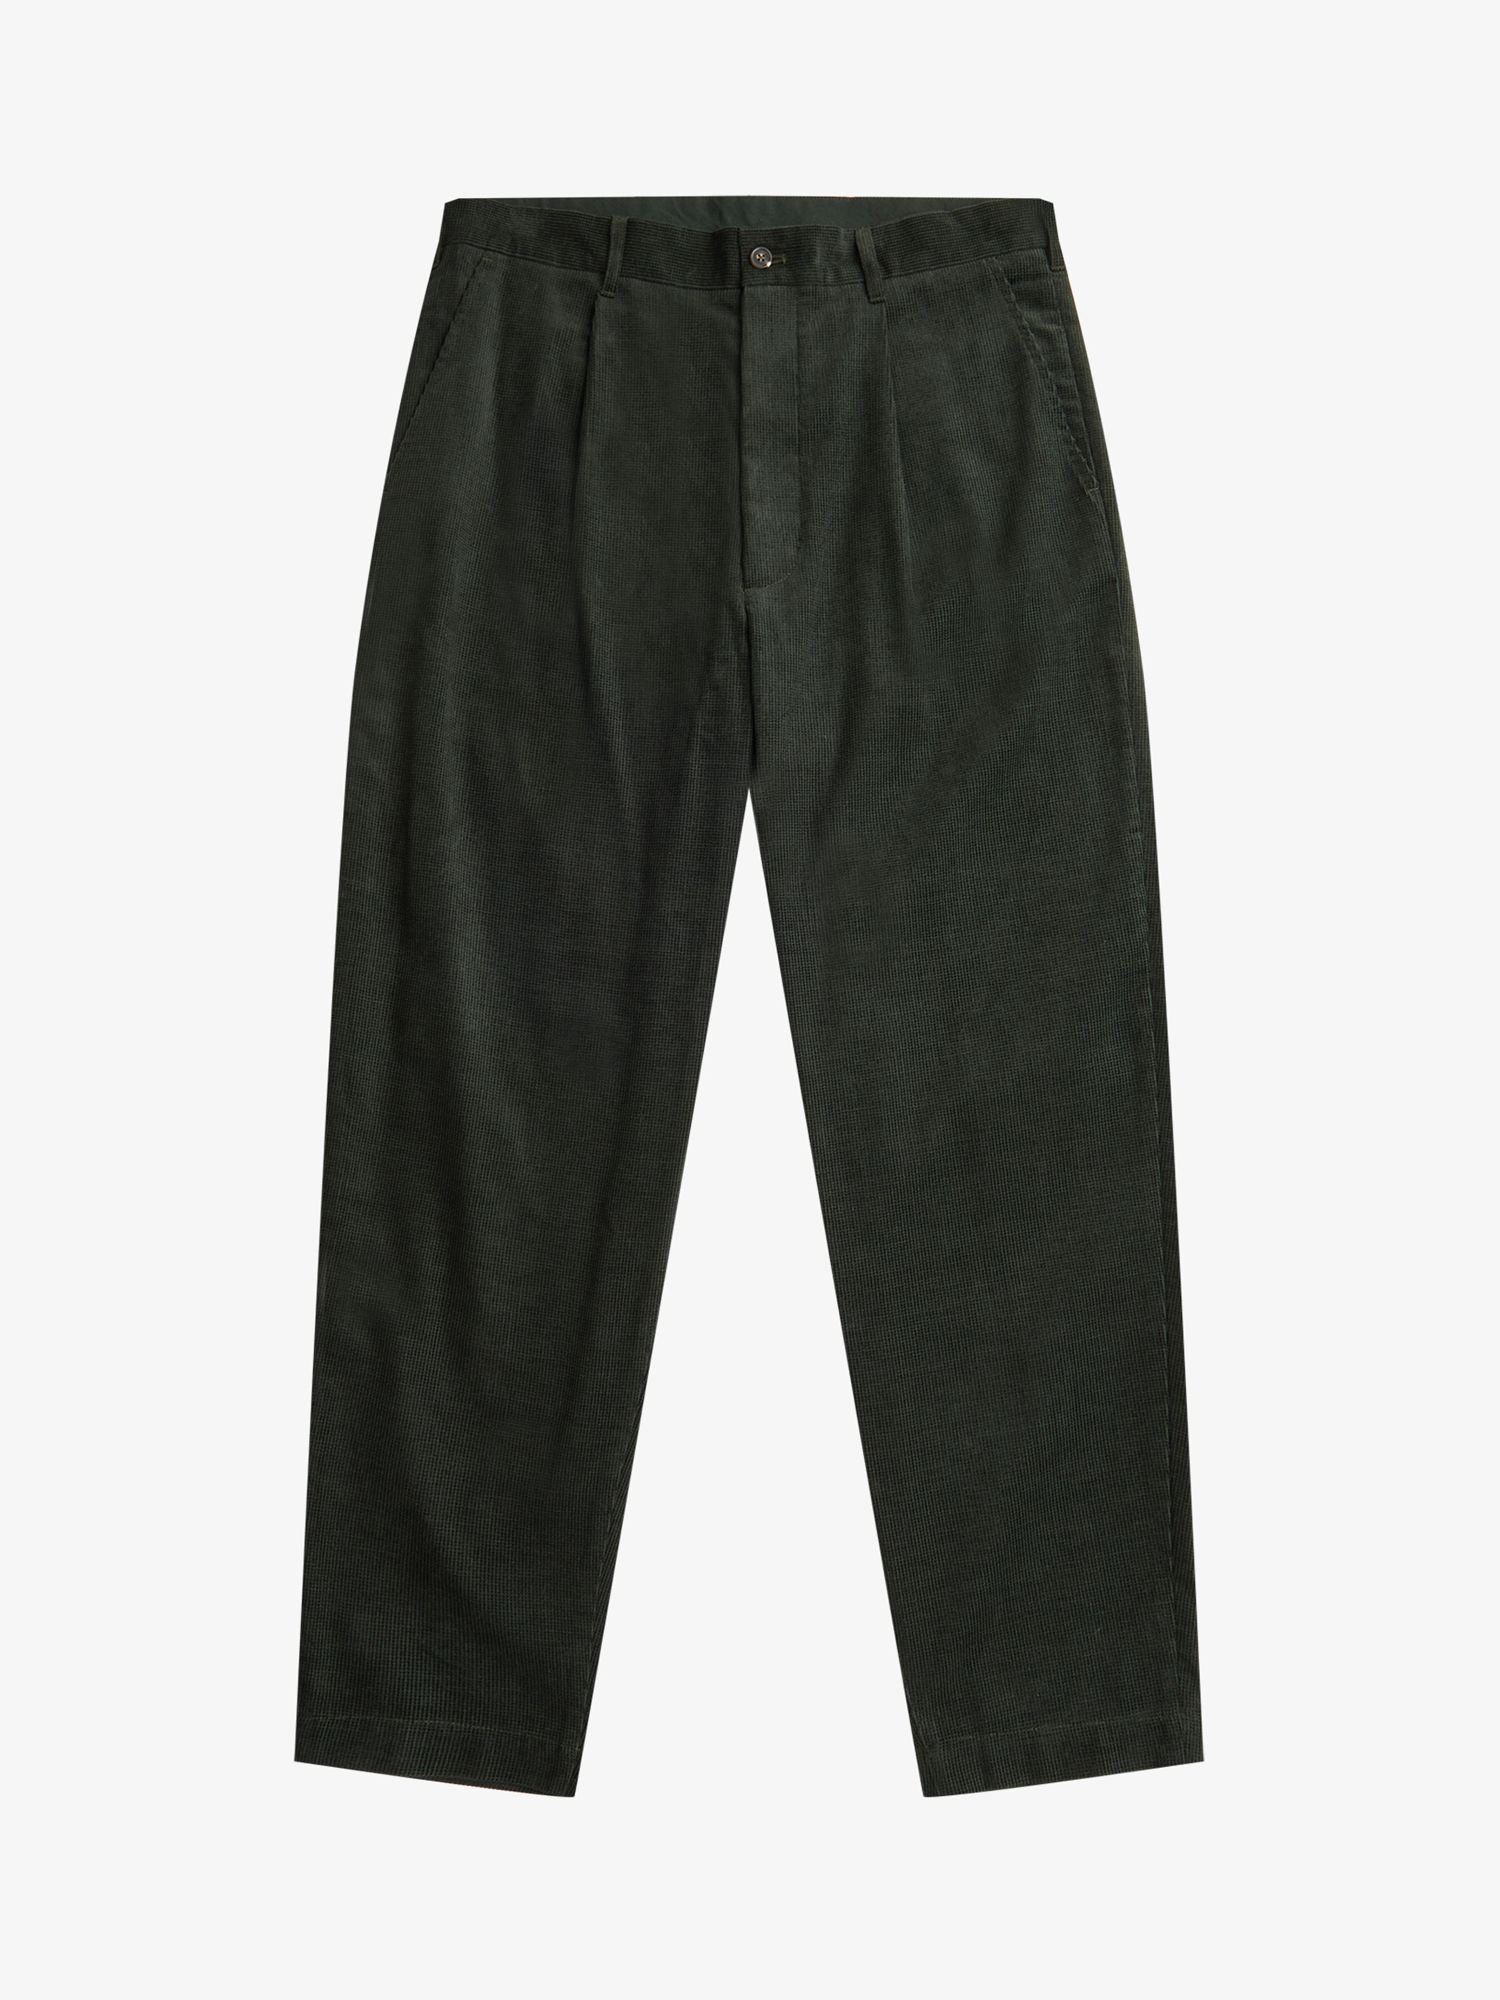 Fred Perry Waffle Cord Tapered Trousers, Night Green, 32R